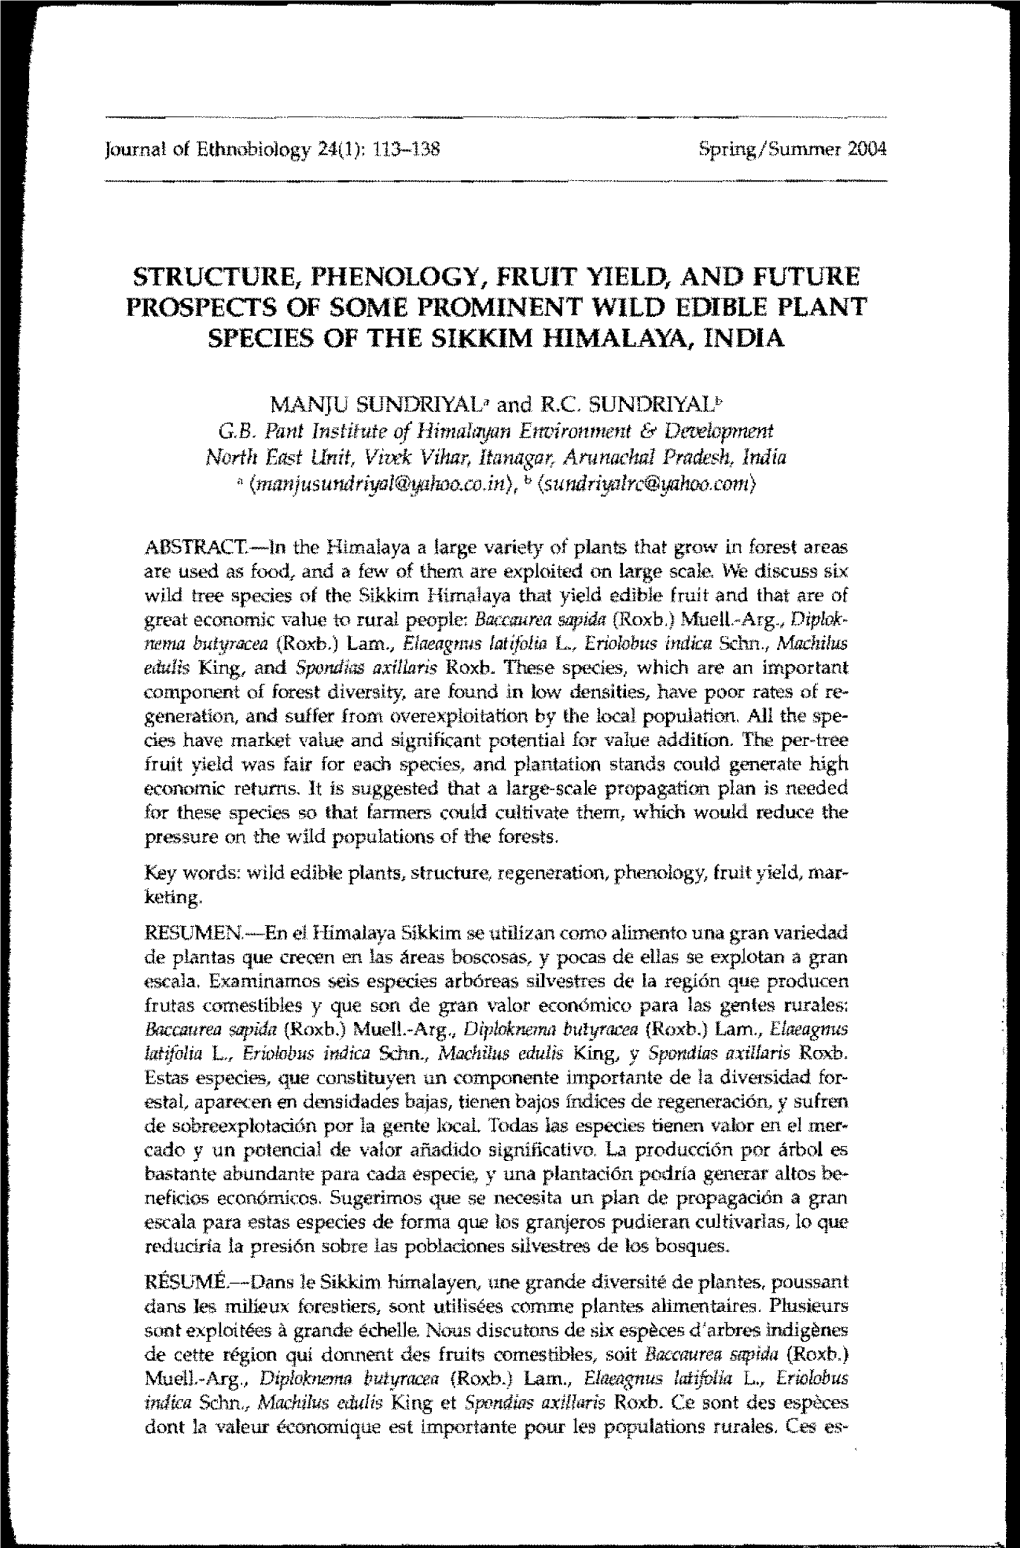 Structure, Phenology, Fruit Yield, and Future Prospects of Some Prominent Wild Edible Plant Species of the Sikkim Himalaya, India